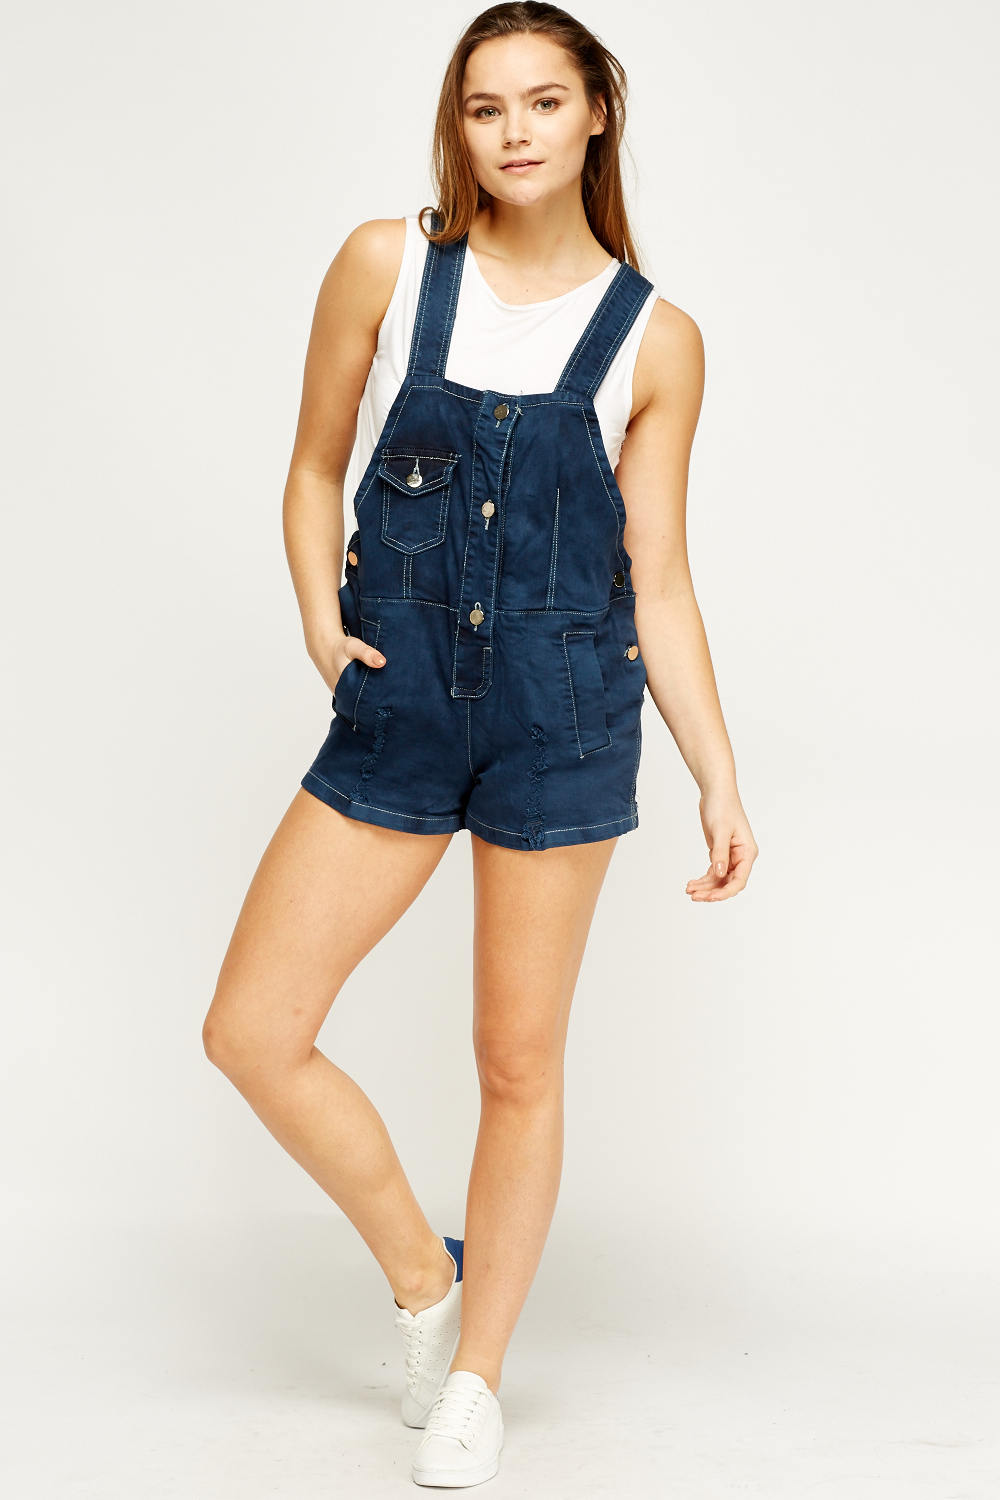 Dungaree Playsuit - Just $7